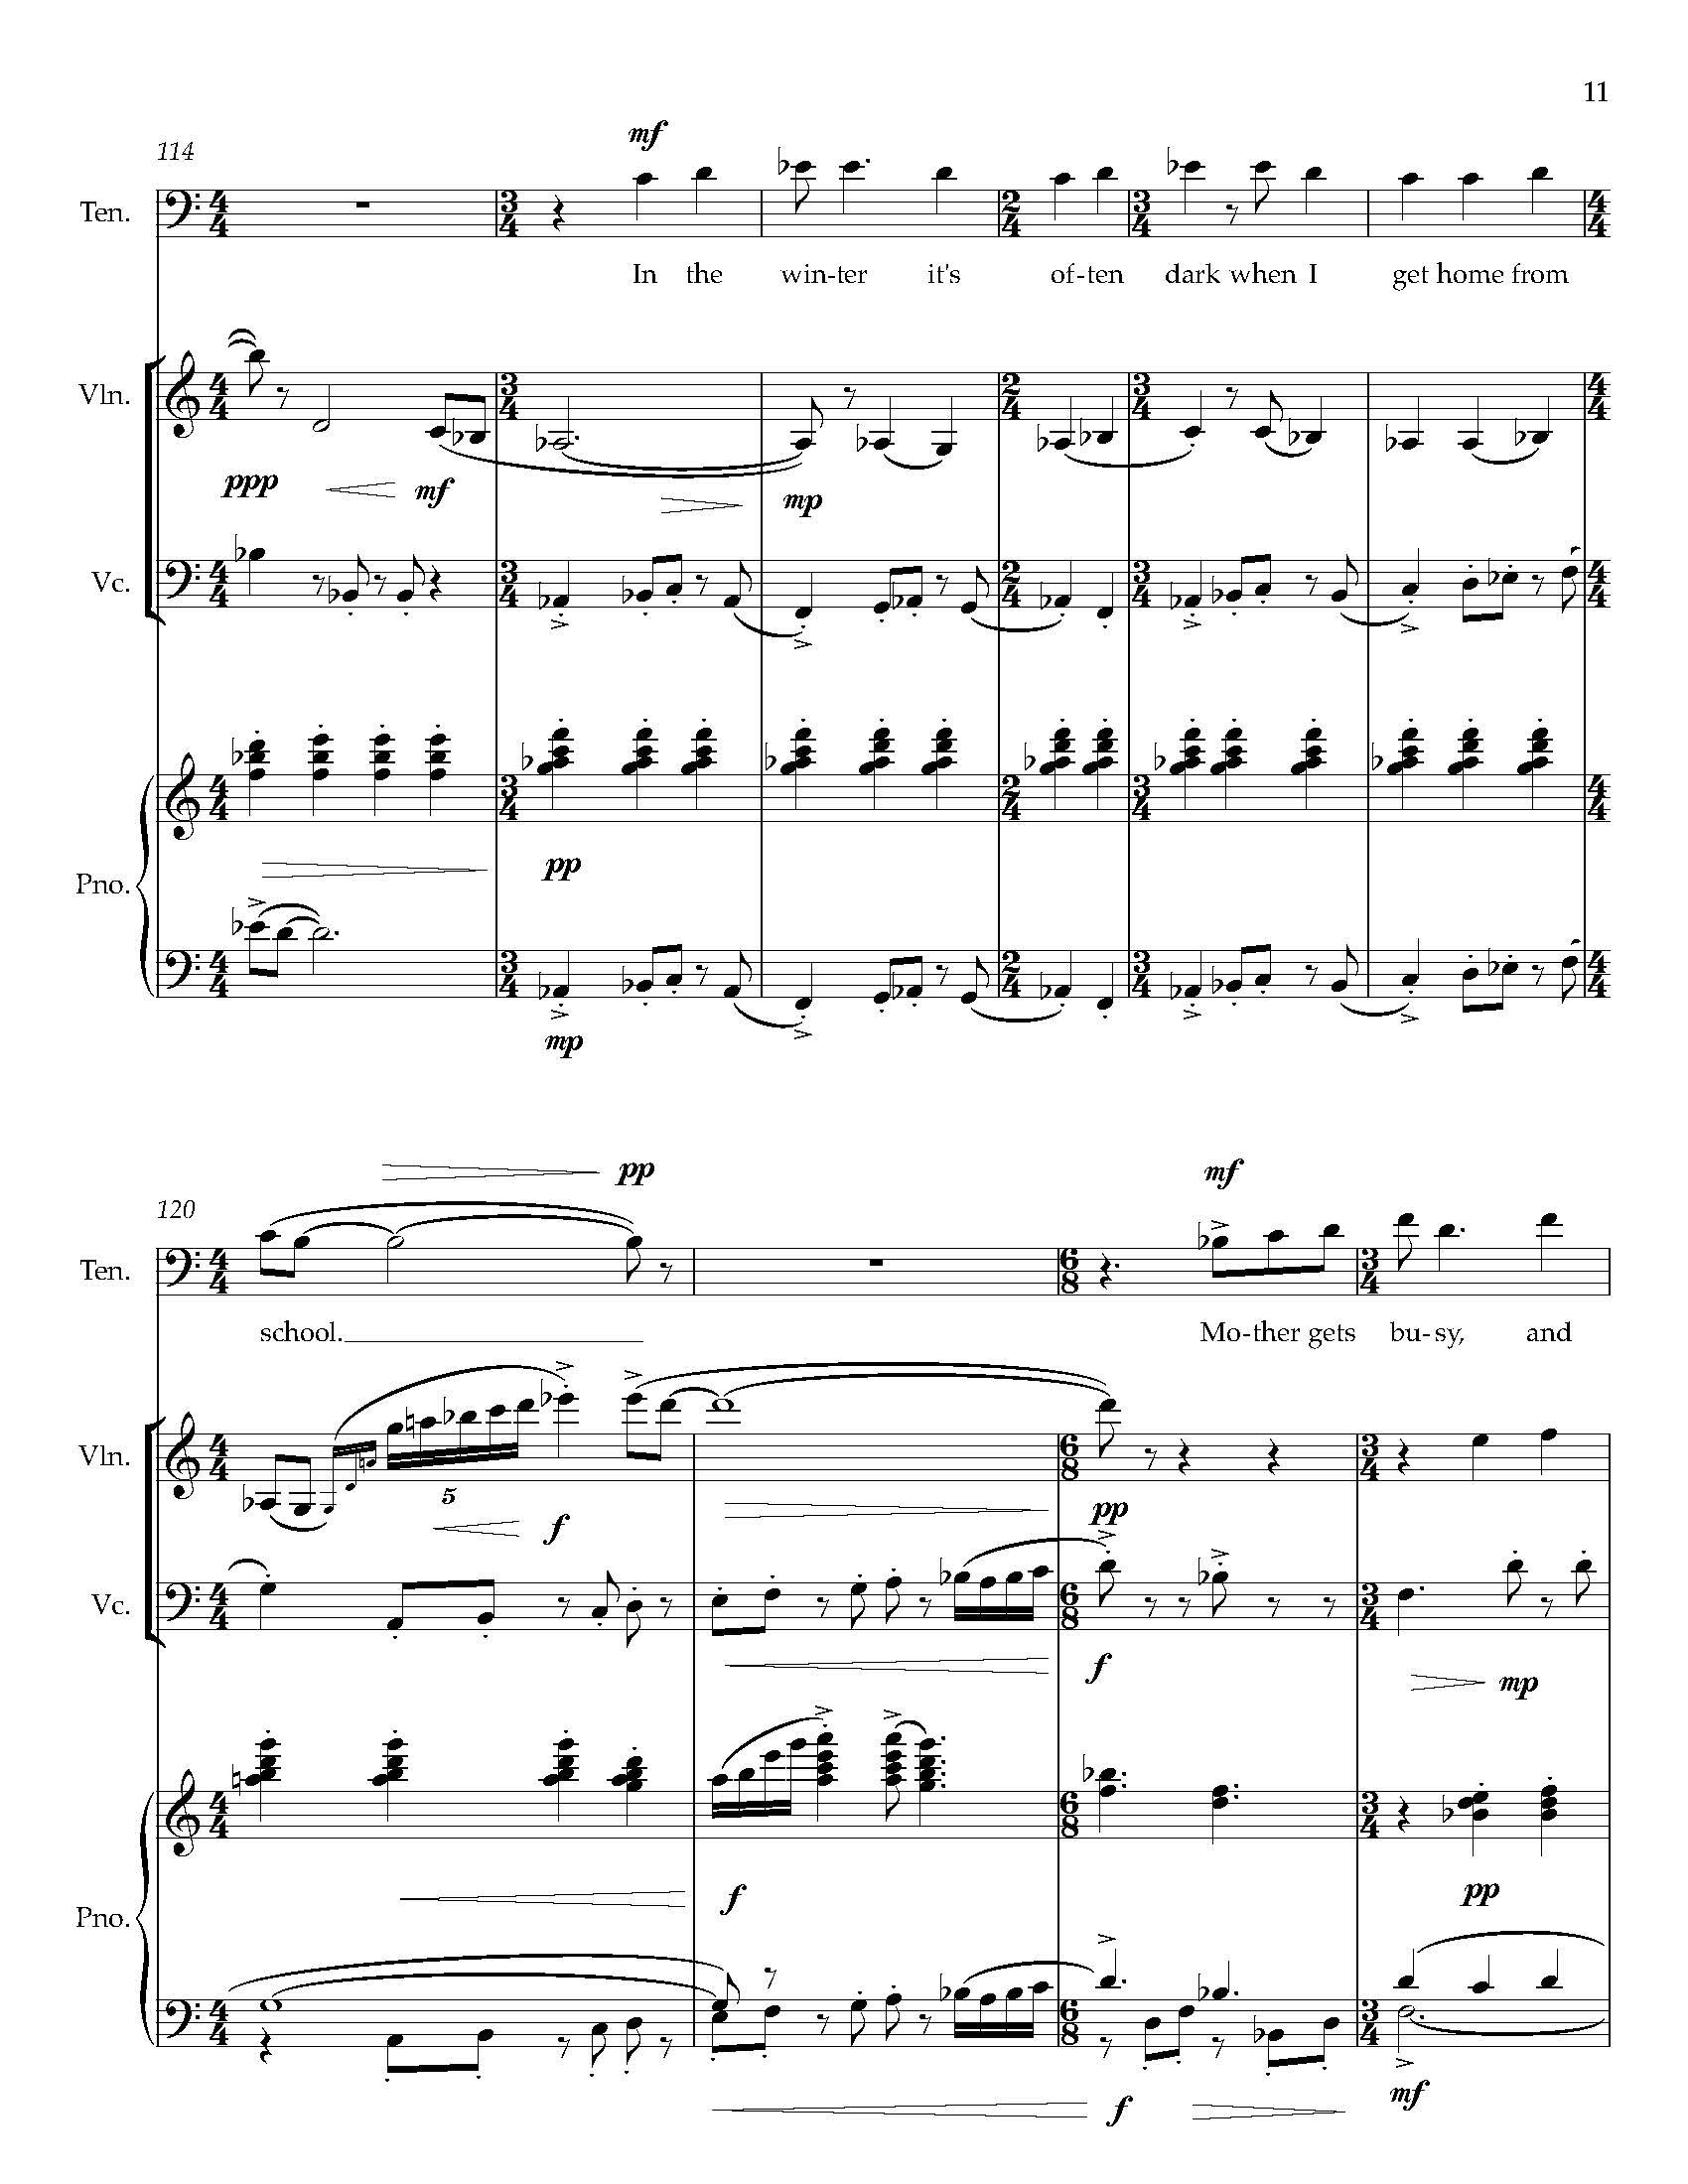 Gursky Songs - Complete Score_Page_19.jpg